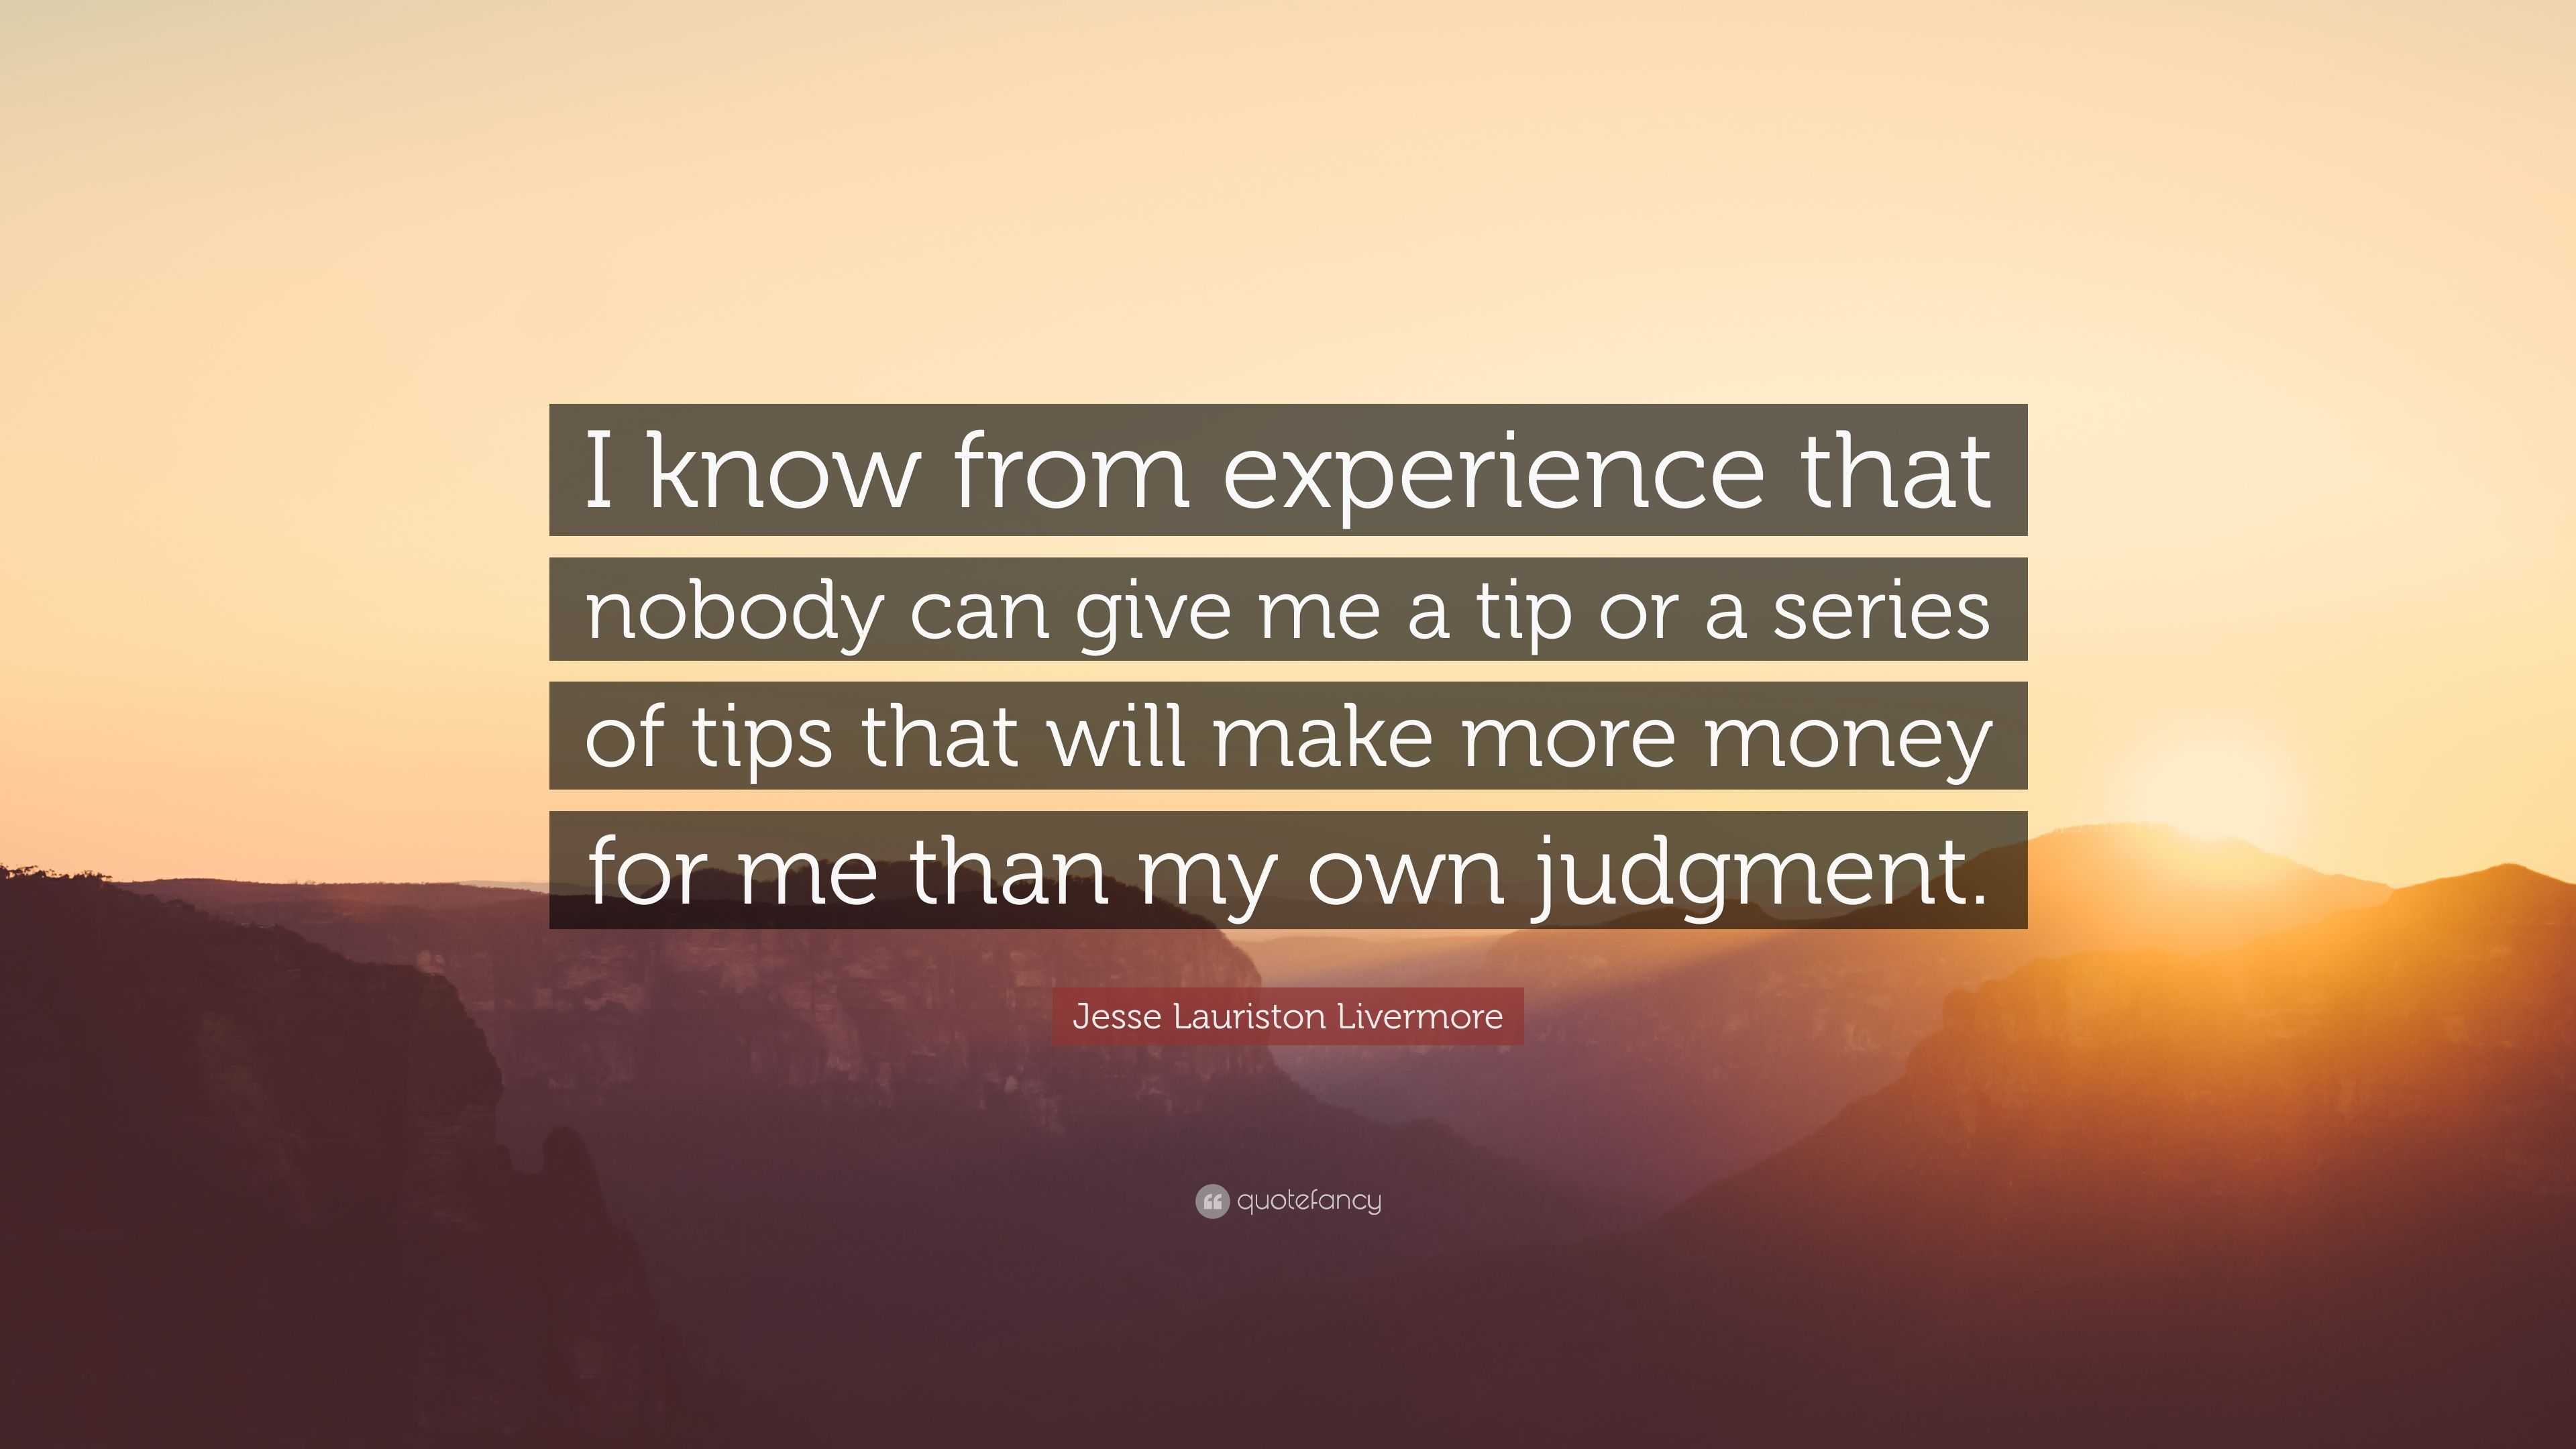 2127768-Jesse-Lauriston-Livermore-Quote-I-know-from-experience-that-nobody.jpg